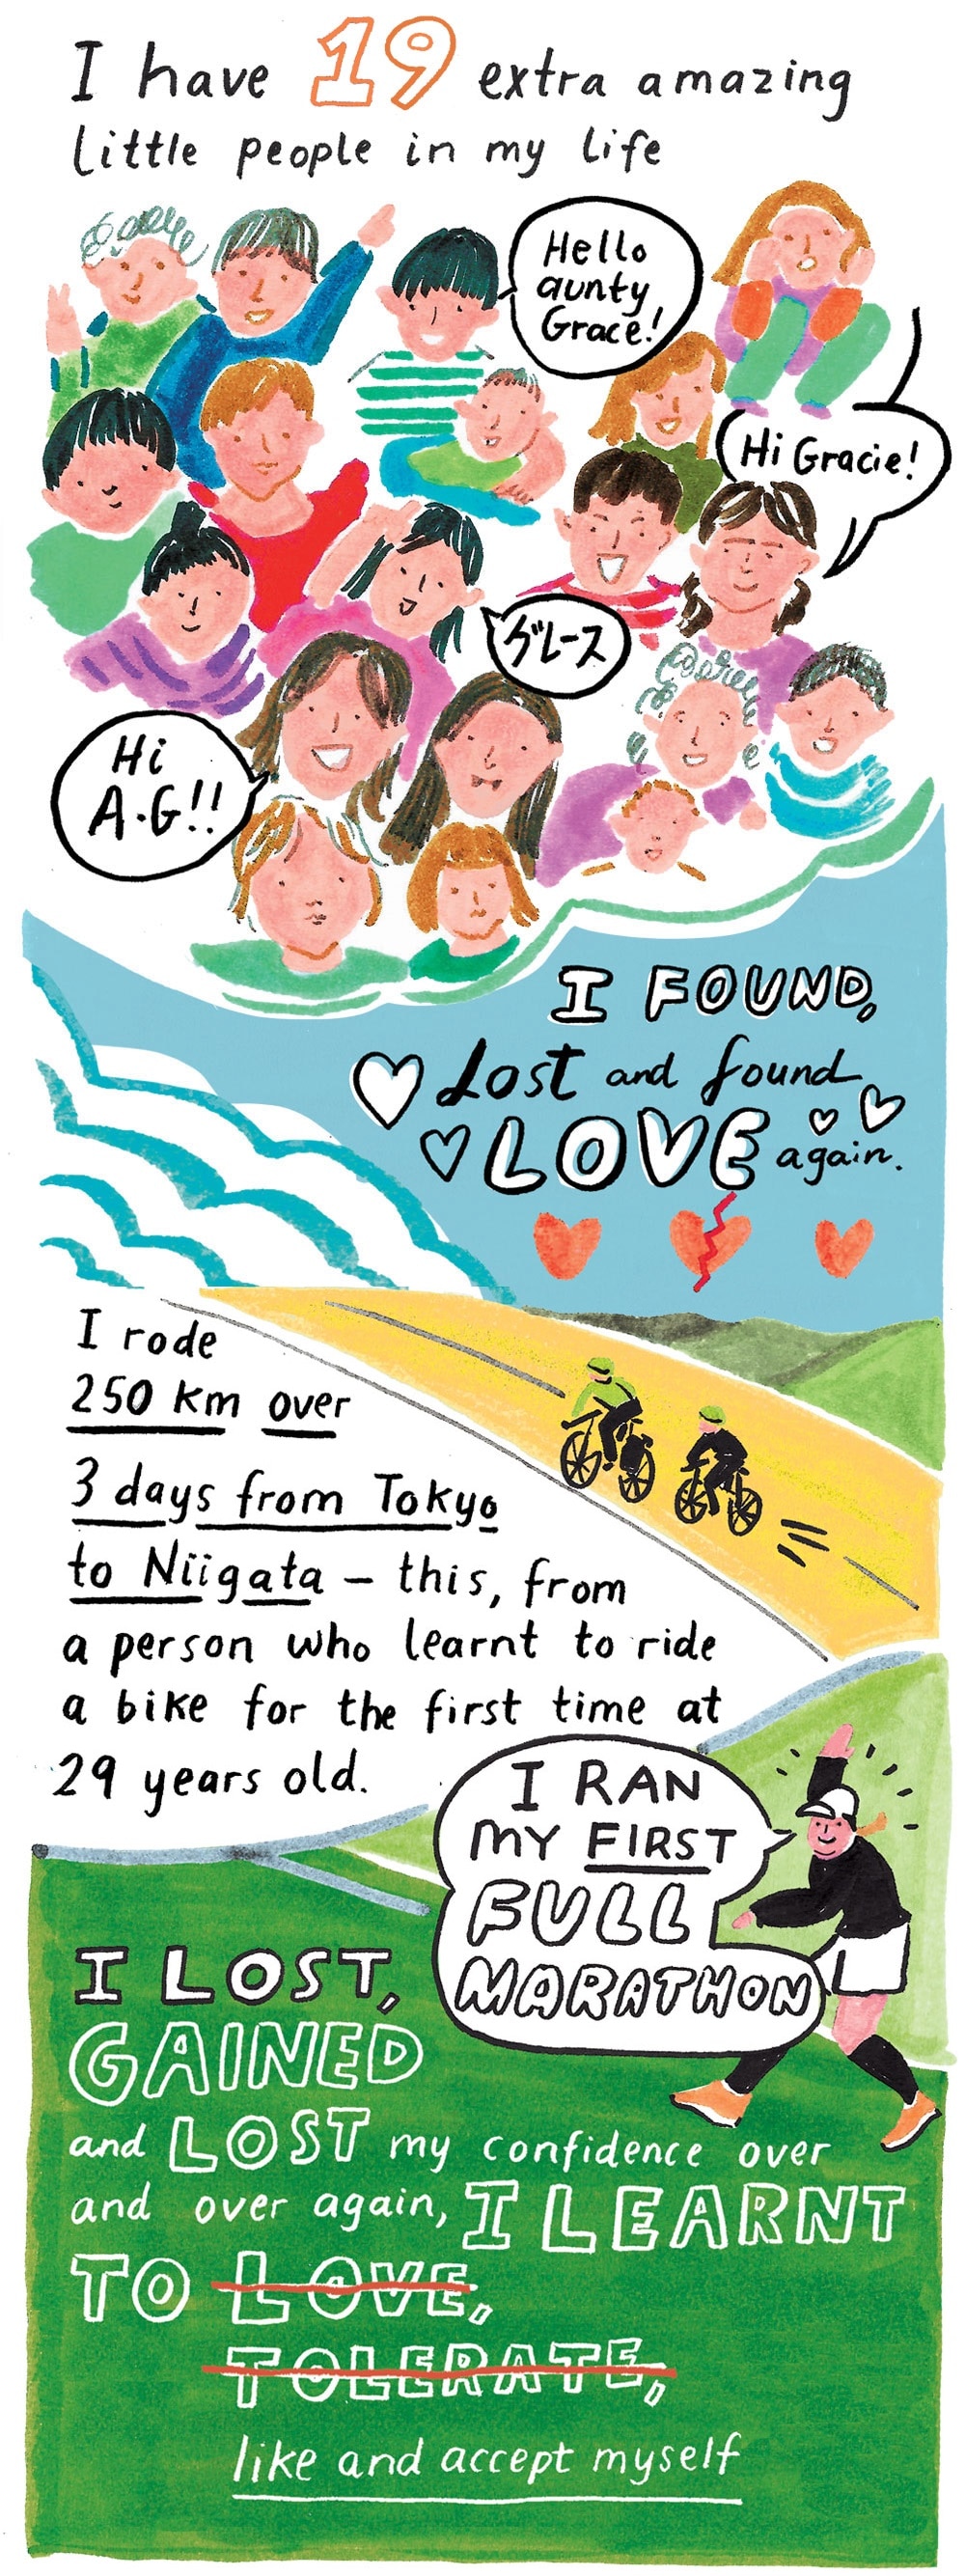 "I found, lost and found love again. I rode from Tokyo to Niigata.  I ran my first marathon. I learnt to like myself."